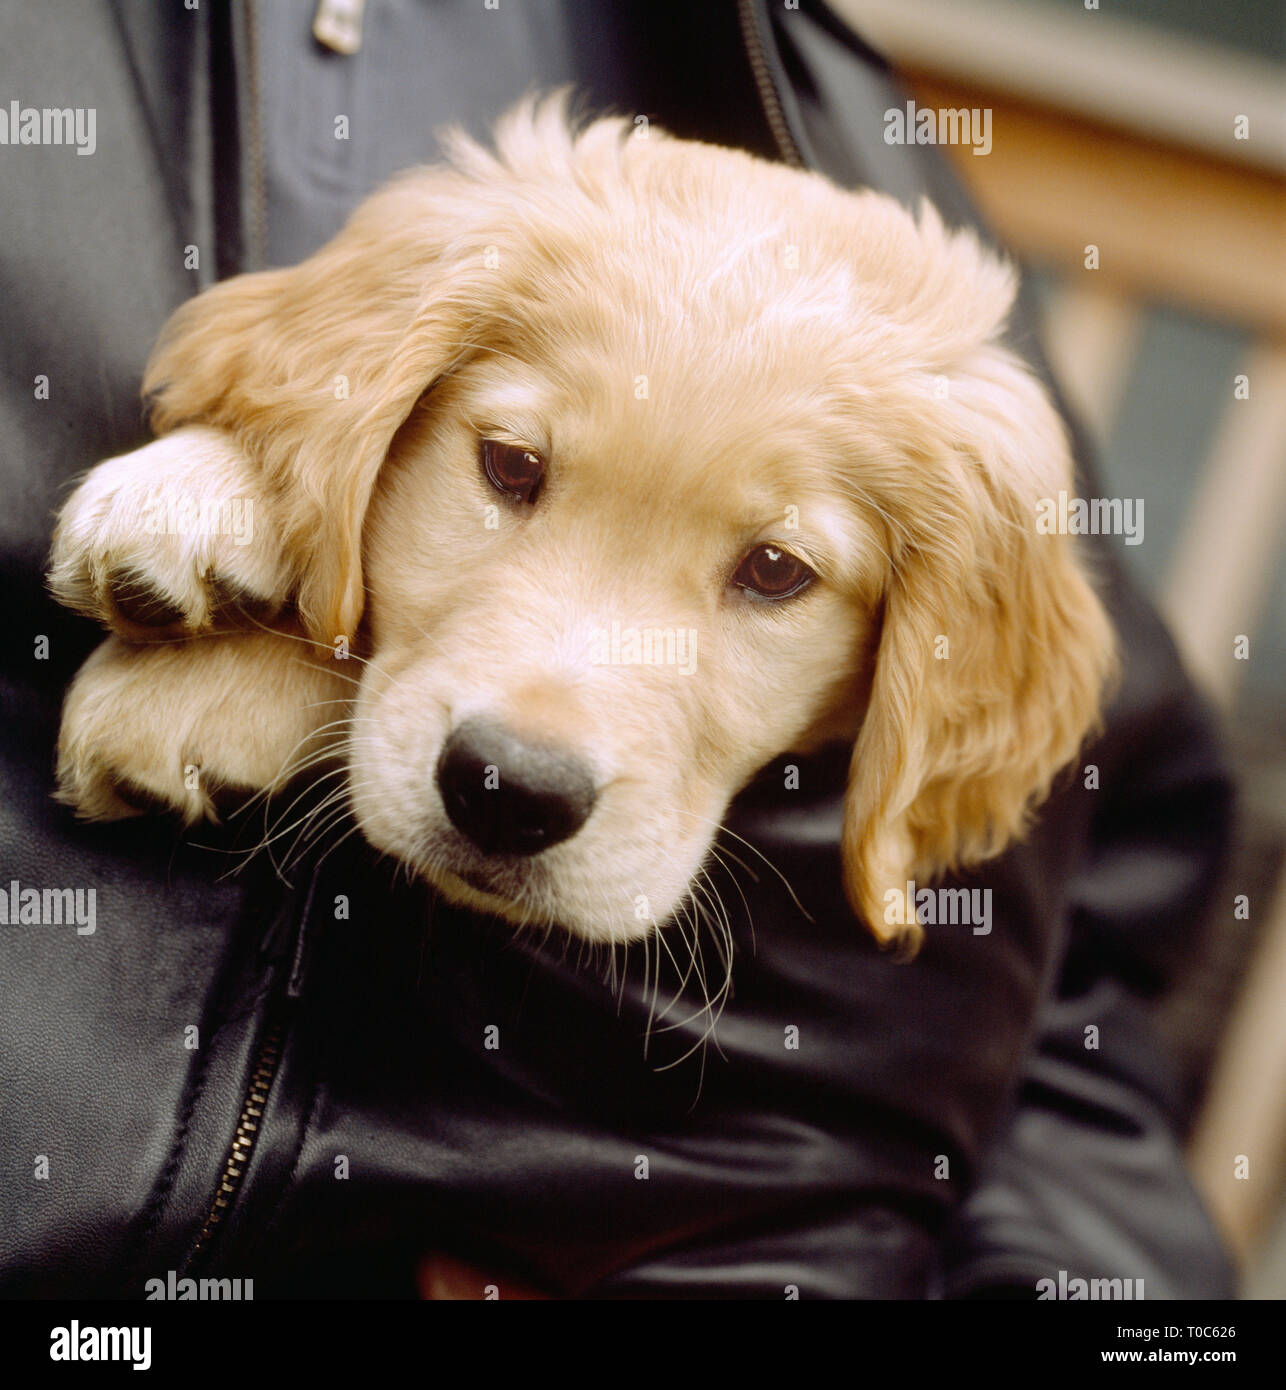 Cute golden lab labrador retriever puppy dog in man's coat jacket. People pet owners with animals. Stock Photo